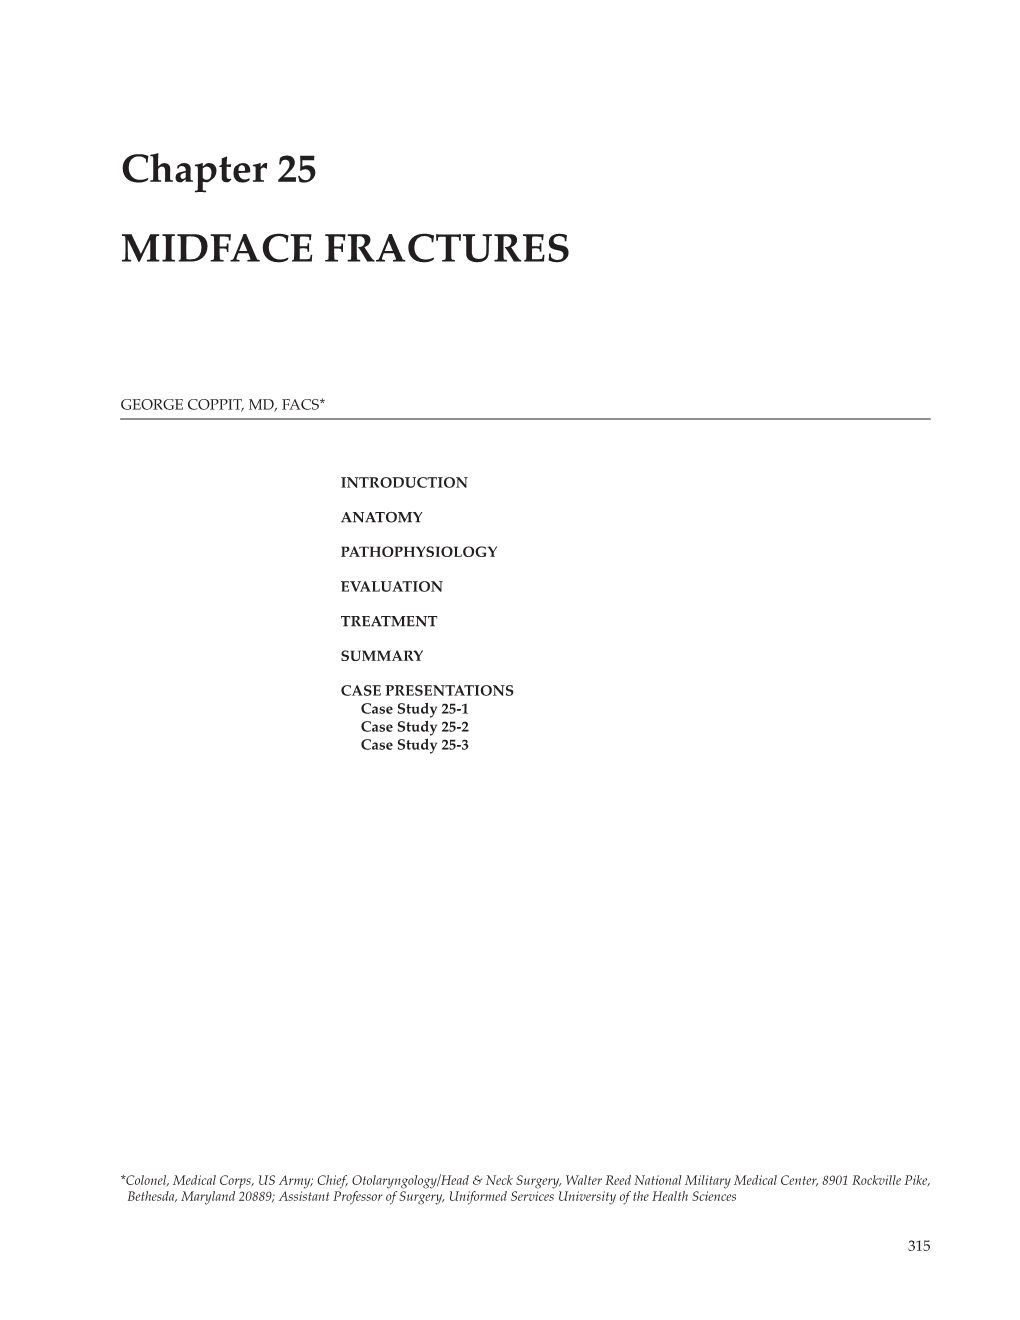 Chapter 25 MIDFACE FRACTURES